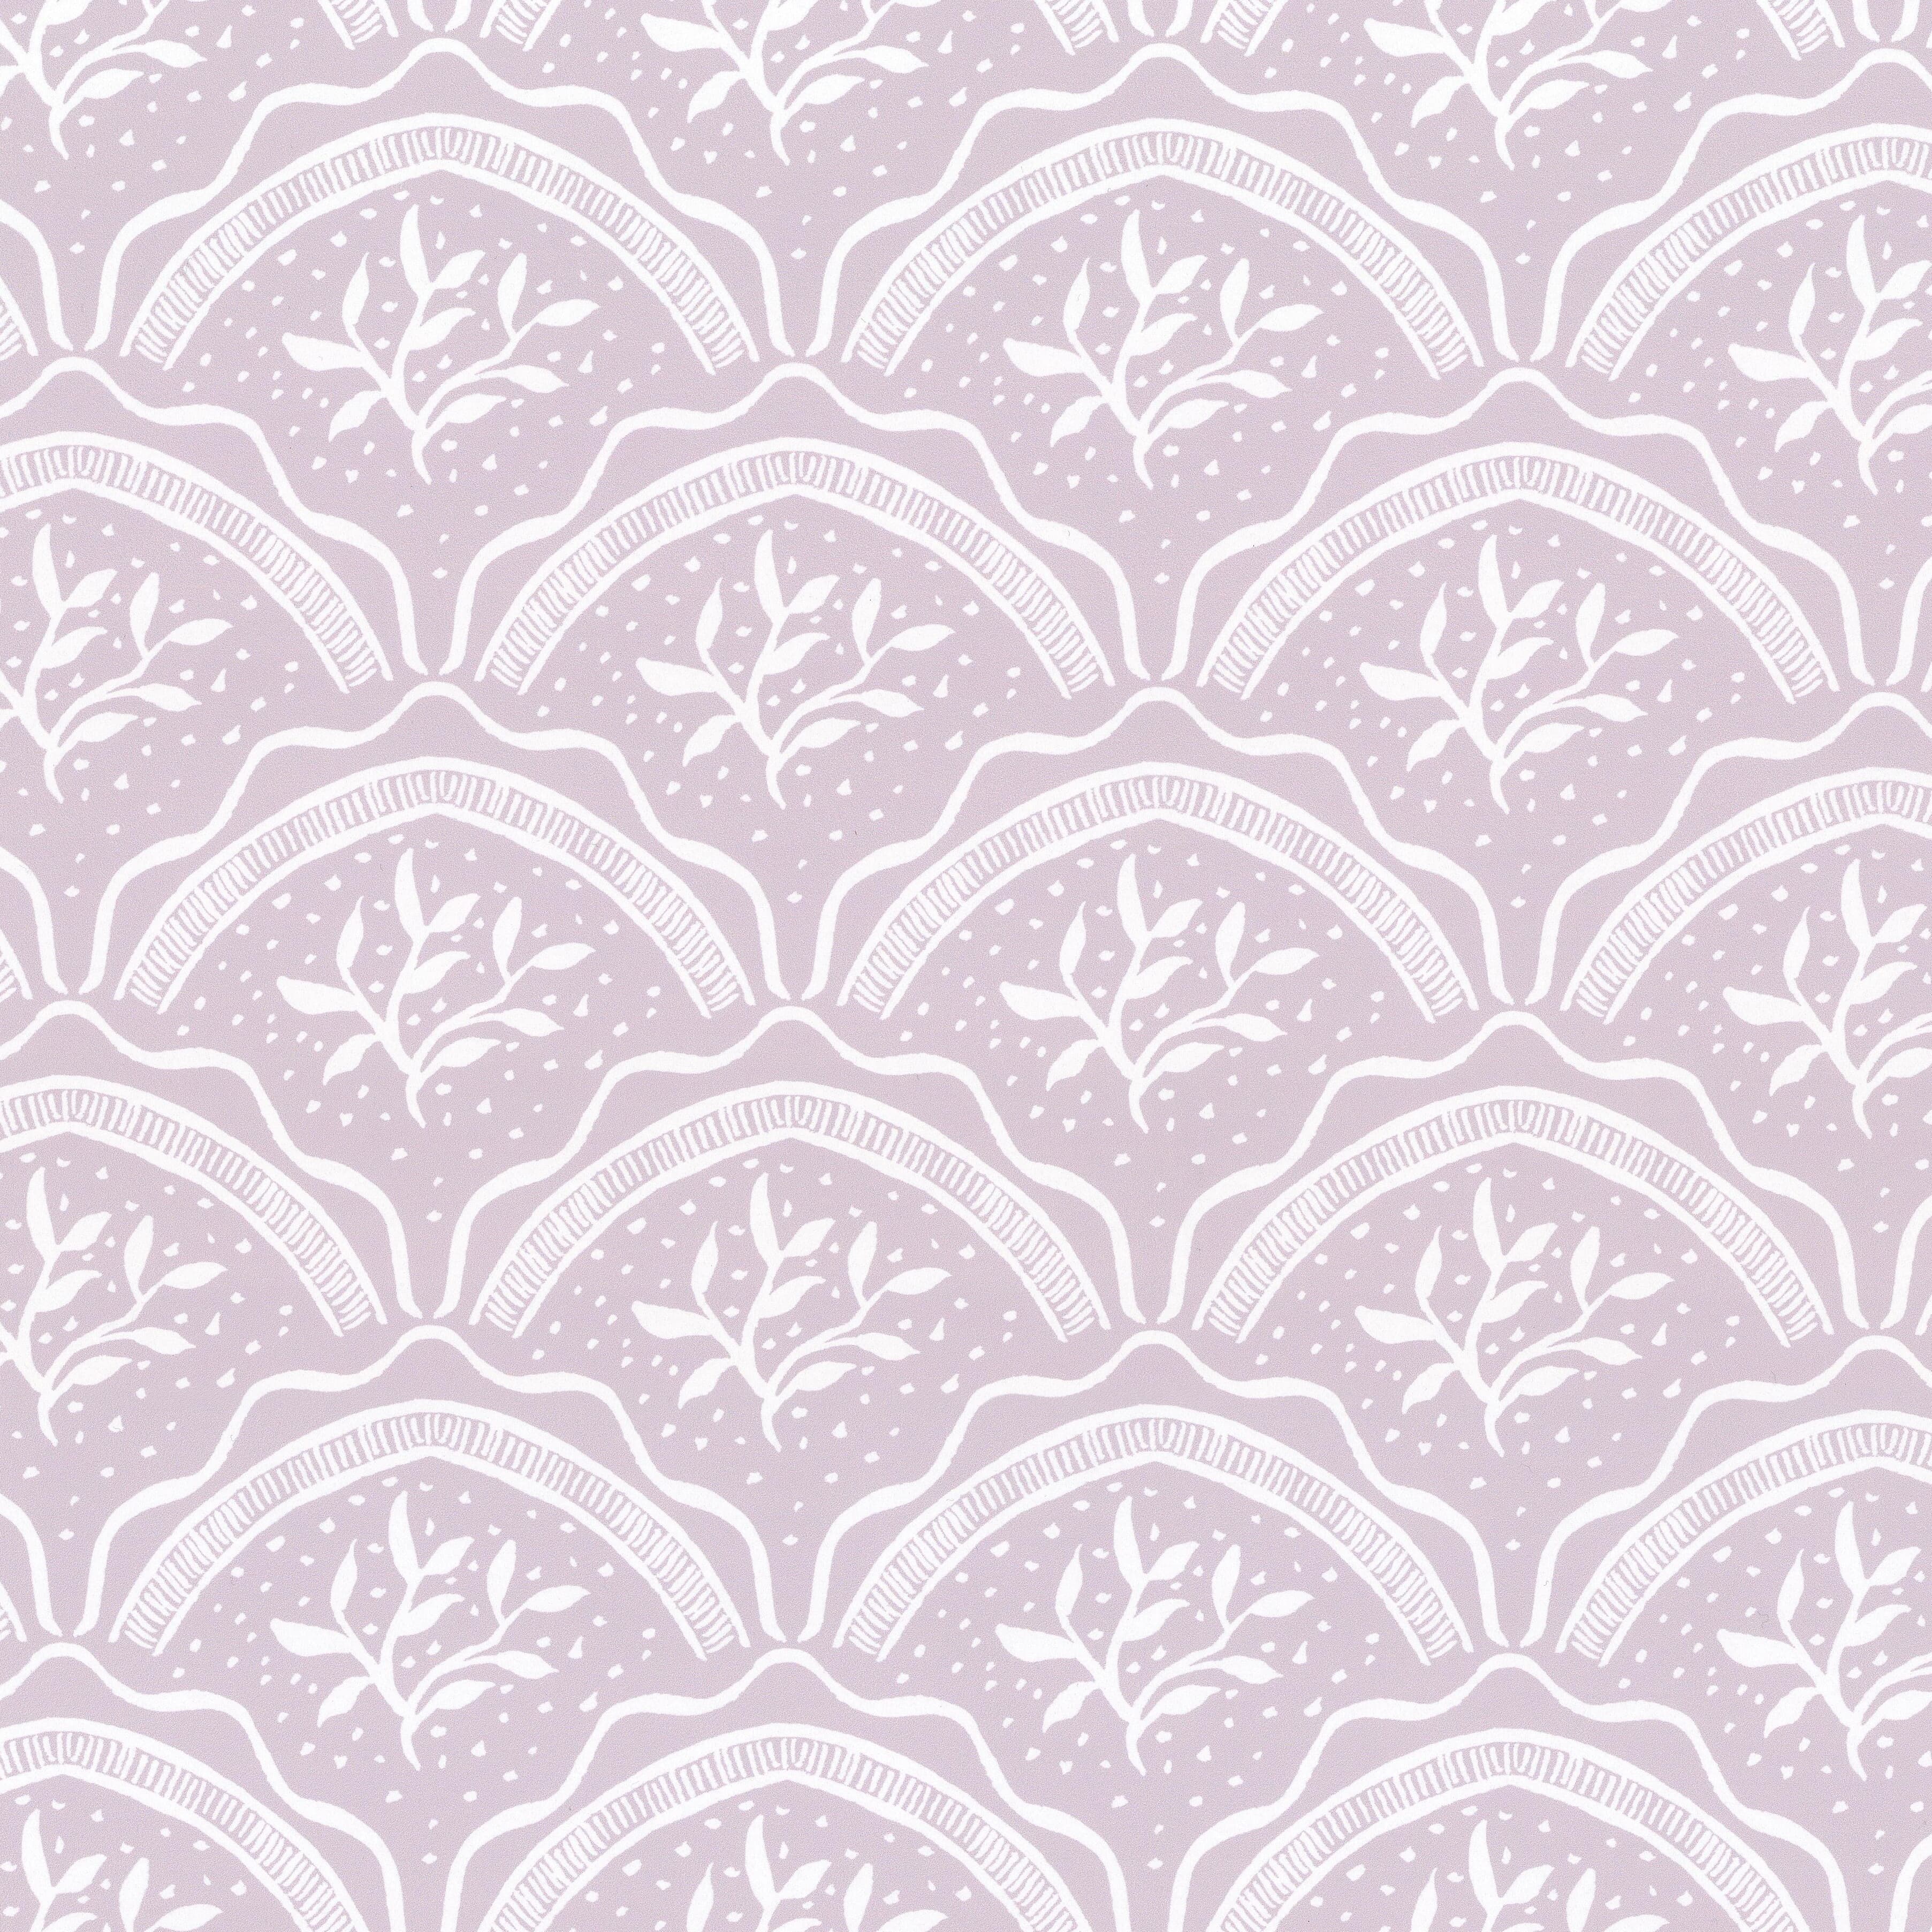 W7845 Vine Scallop 3 Lilac by Stout Fabric